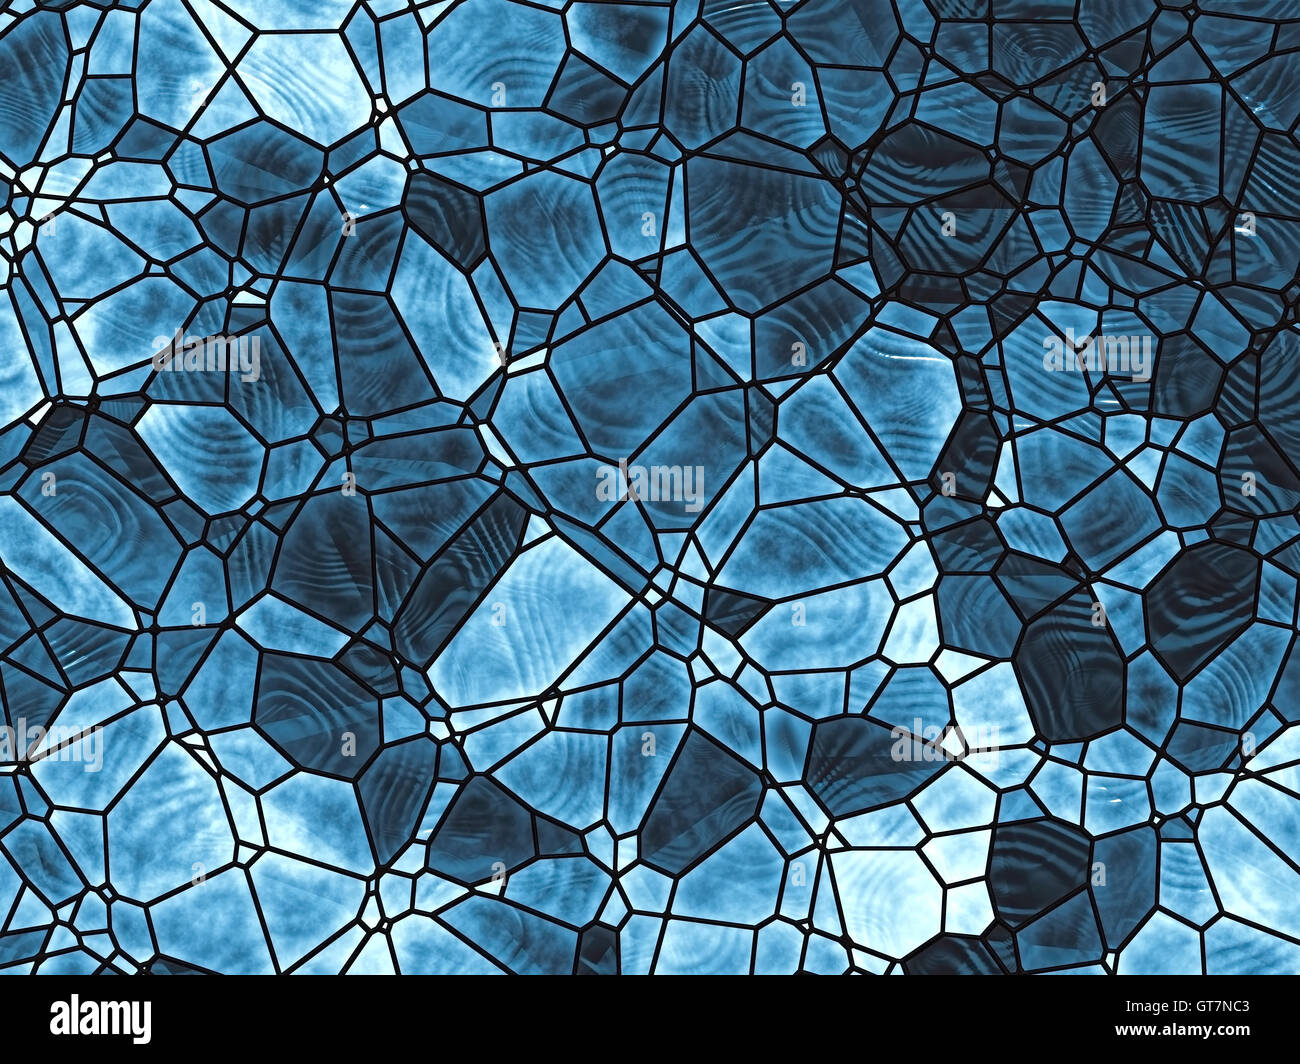 Stained-glass pattern - abstract digitally generated image Stock Photo